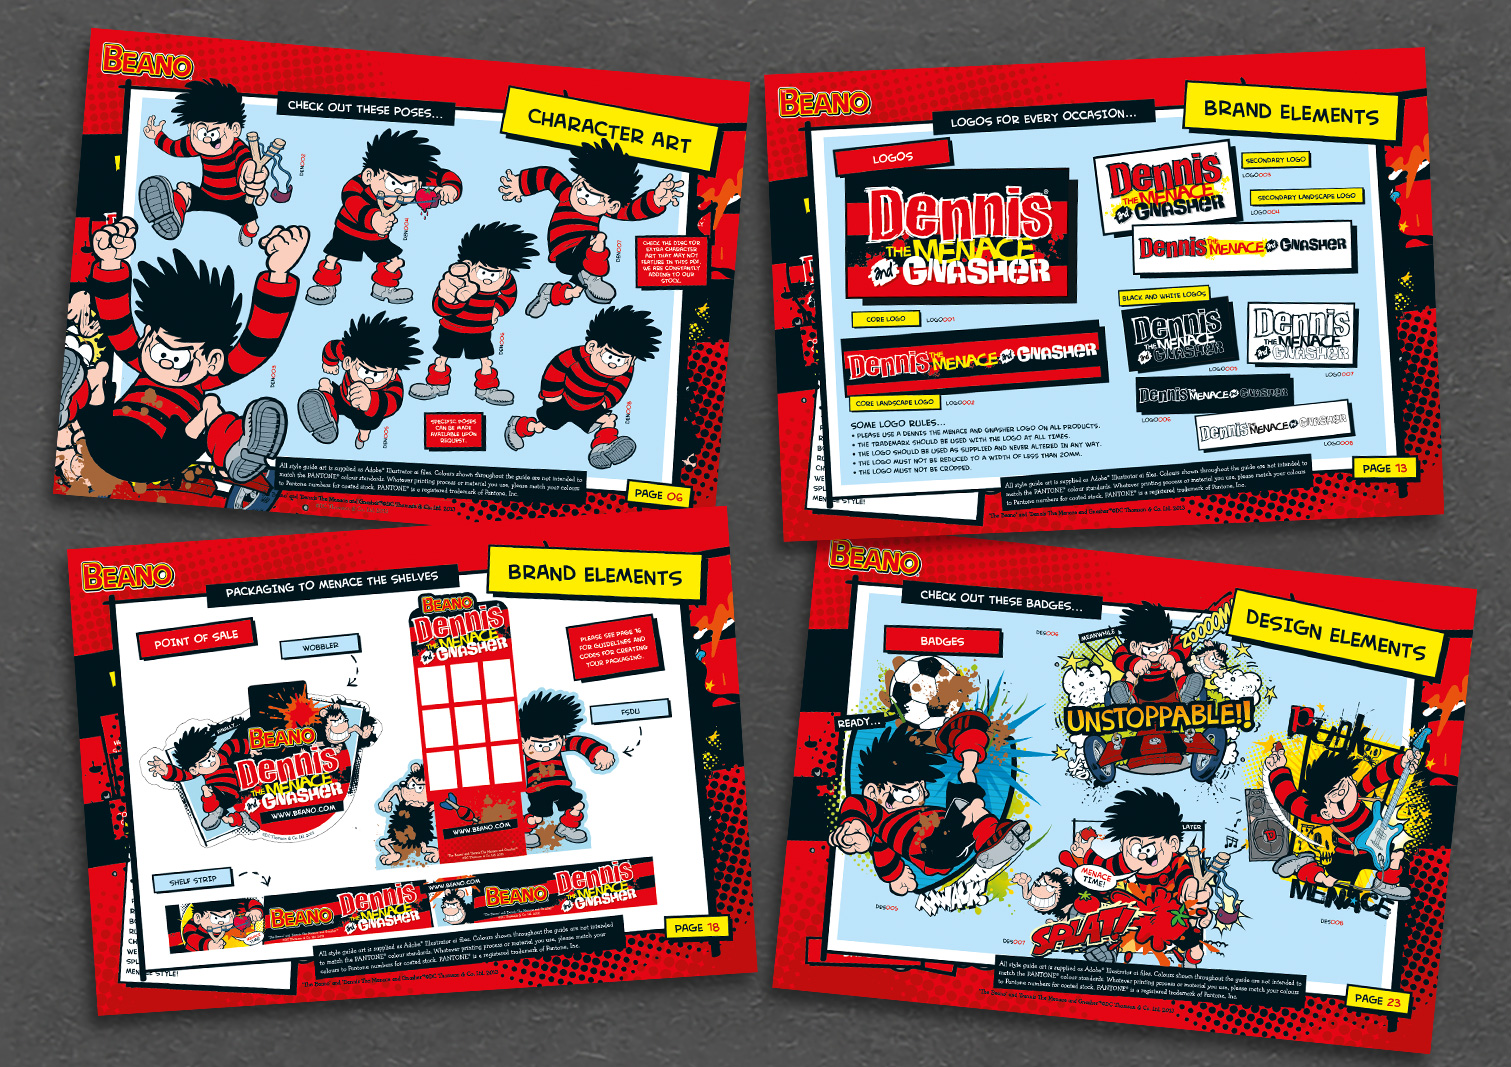 dennis the menace style guide spreads